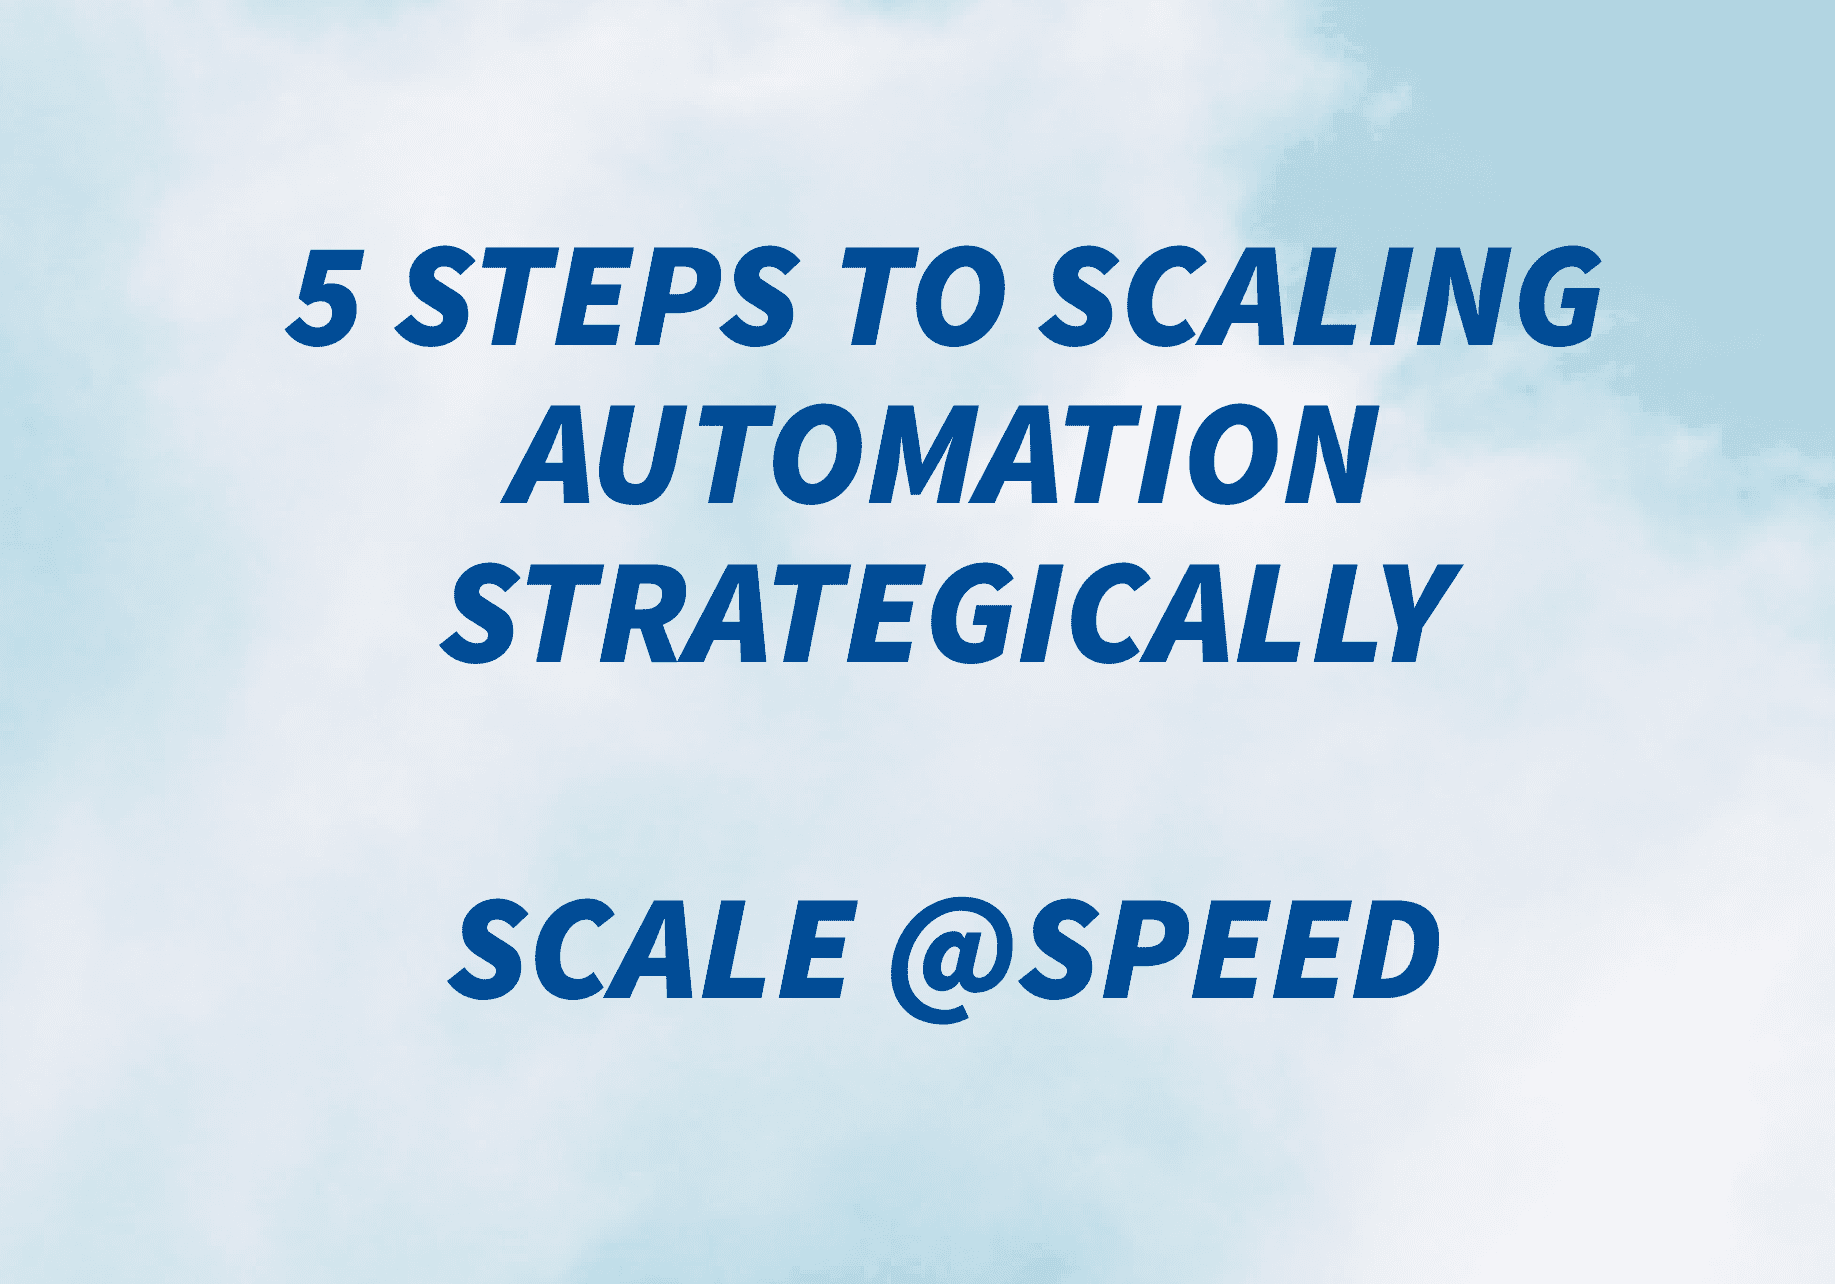 5 steps to scaling automation strategically